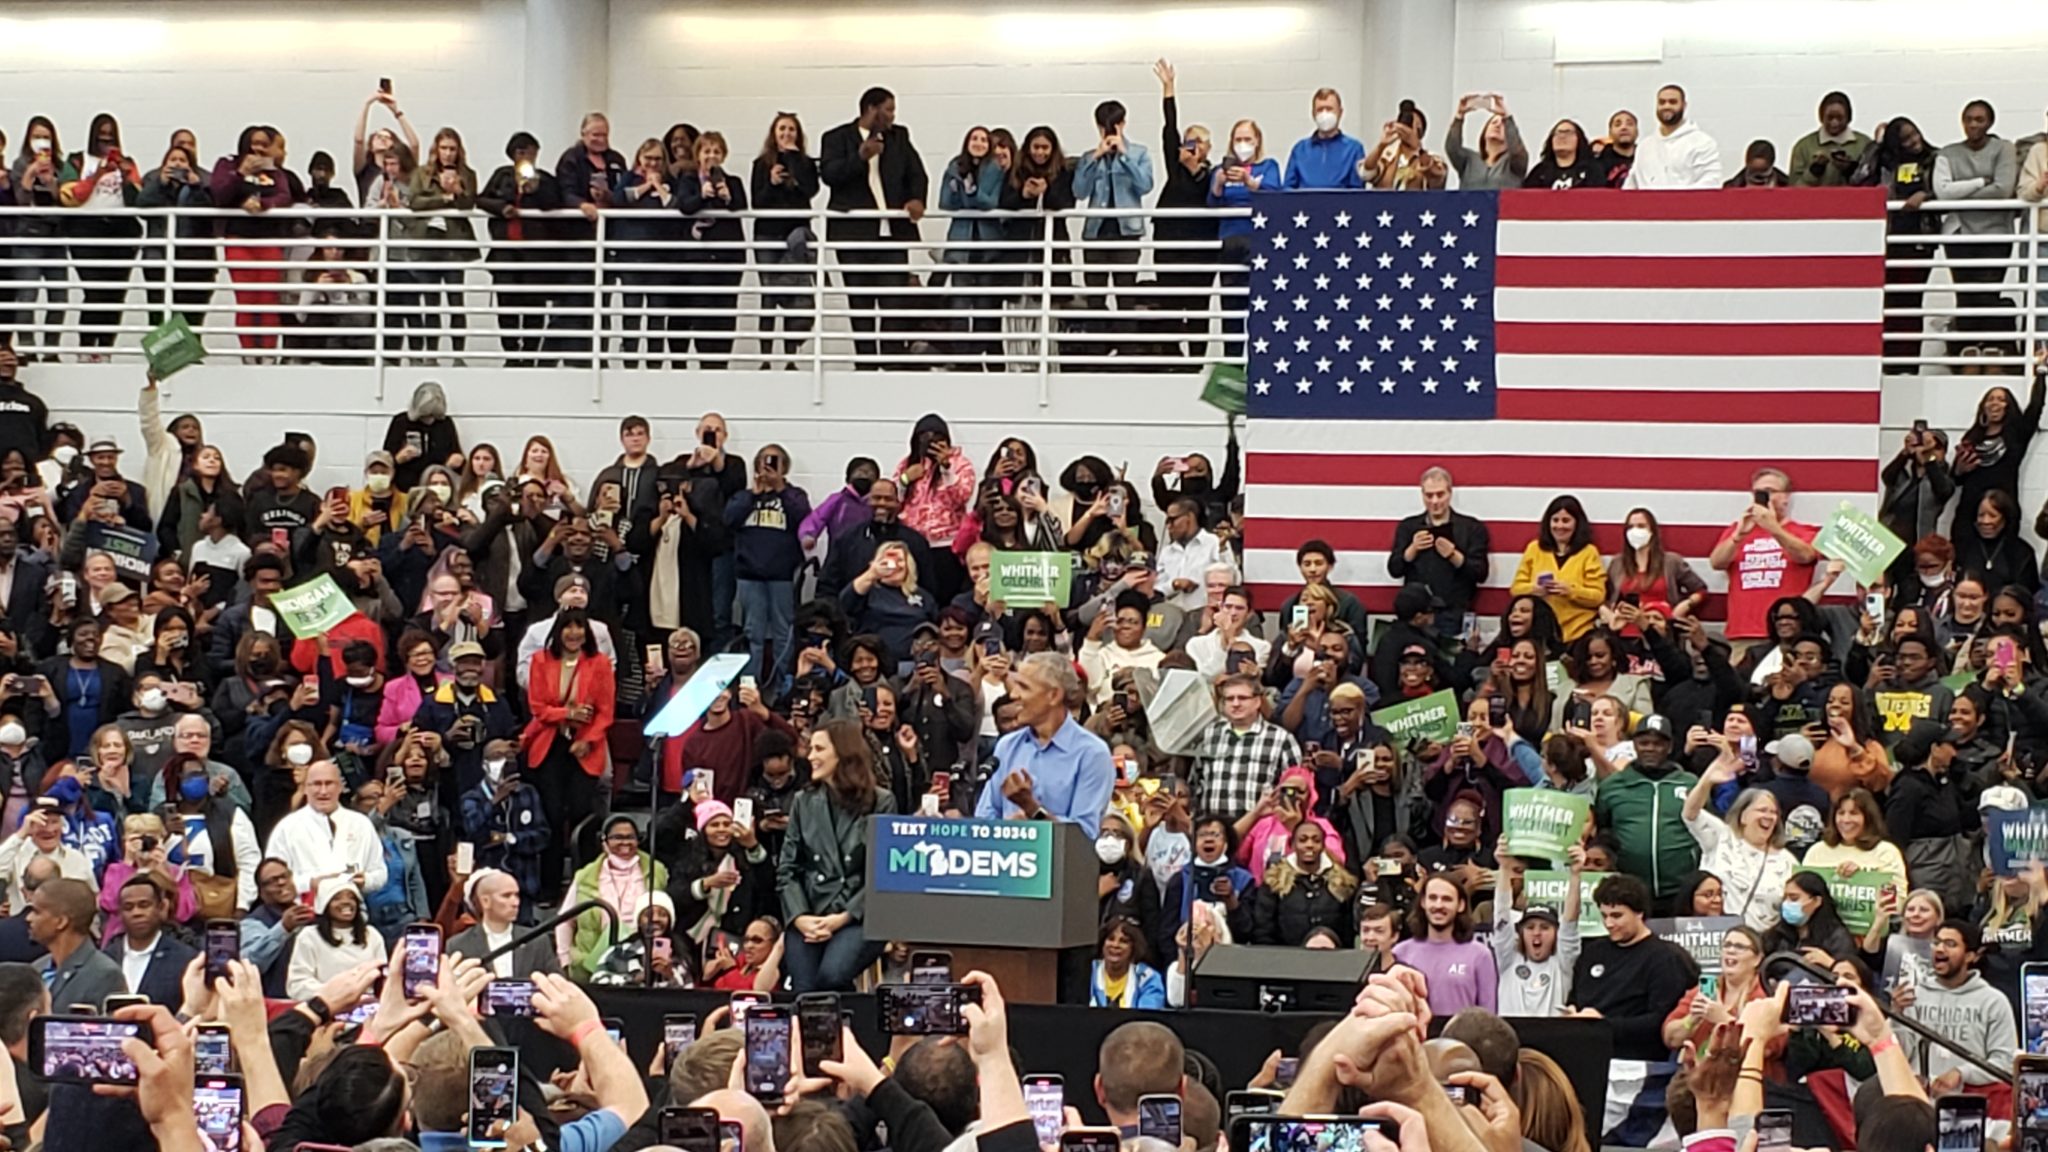 Former President Barack Obama speaks to a crowd of supporters.